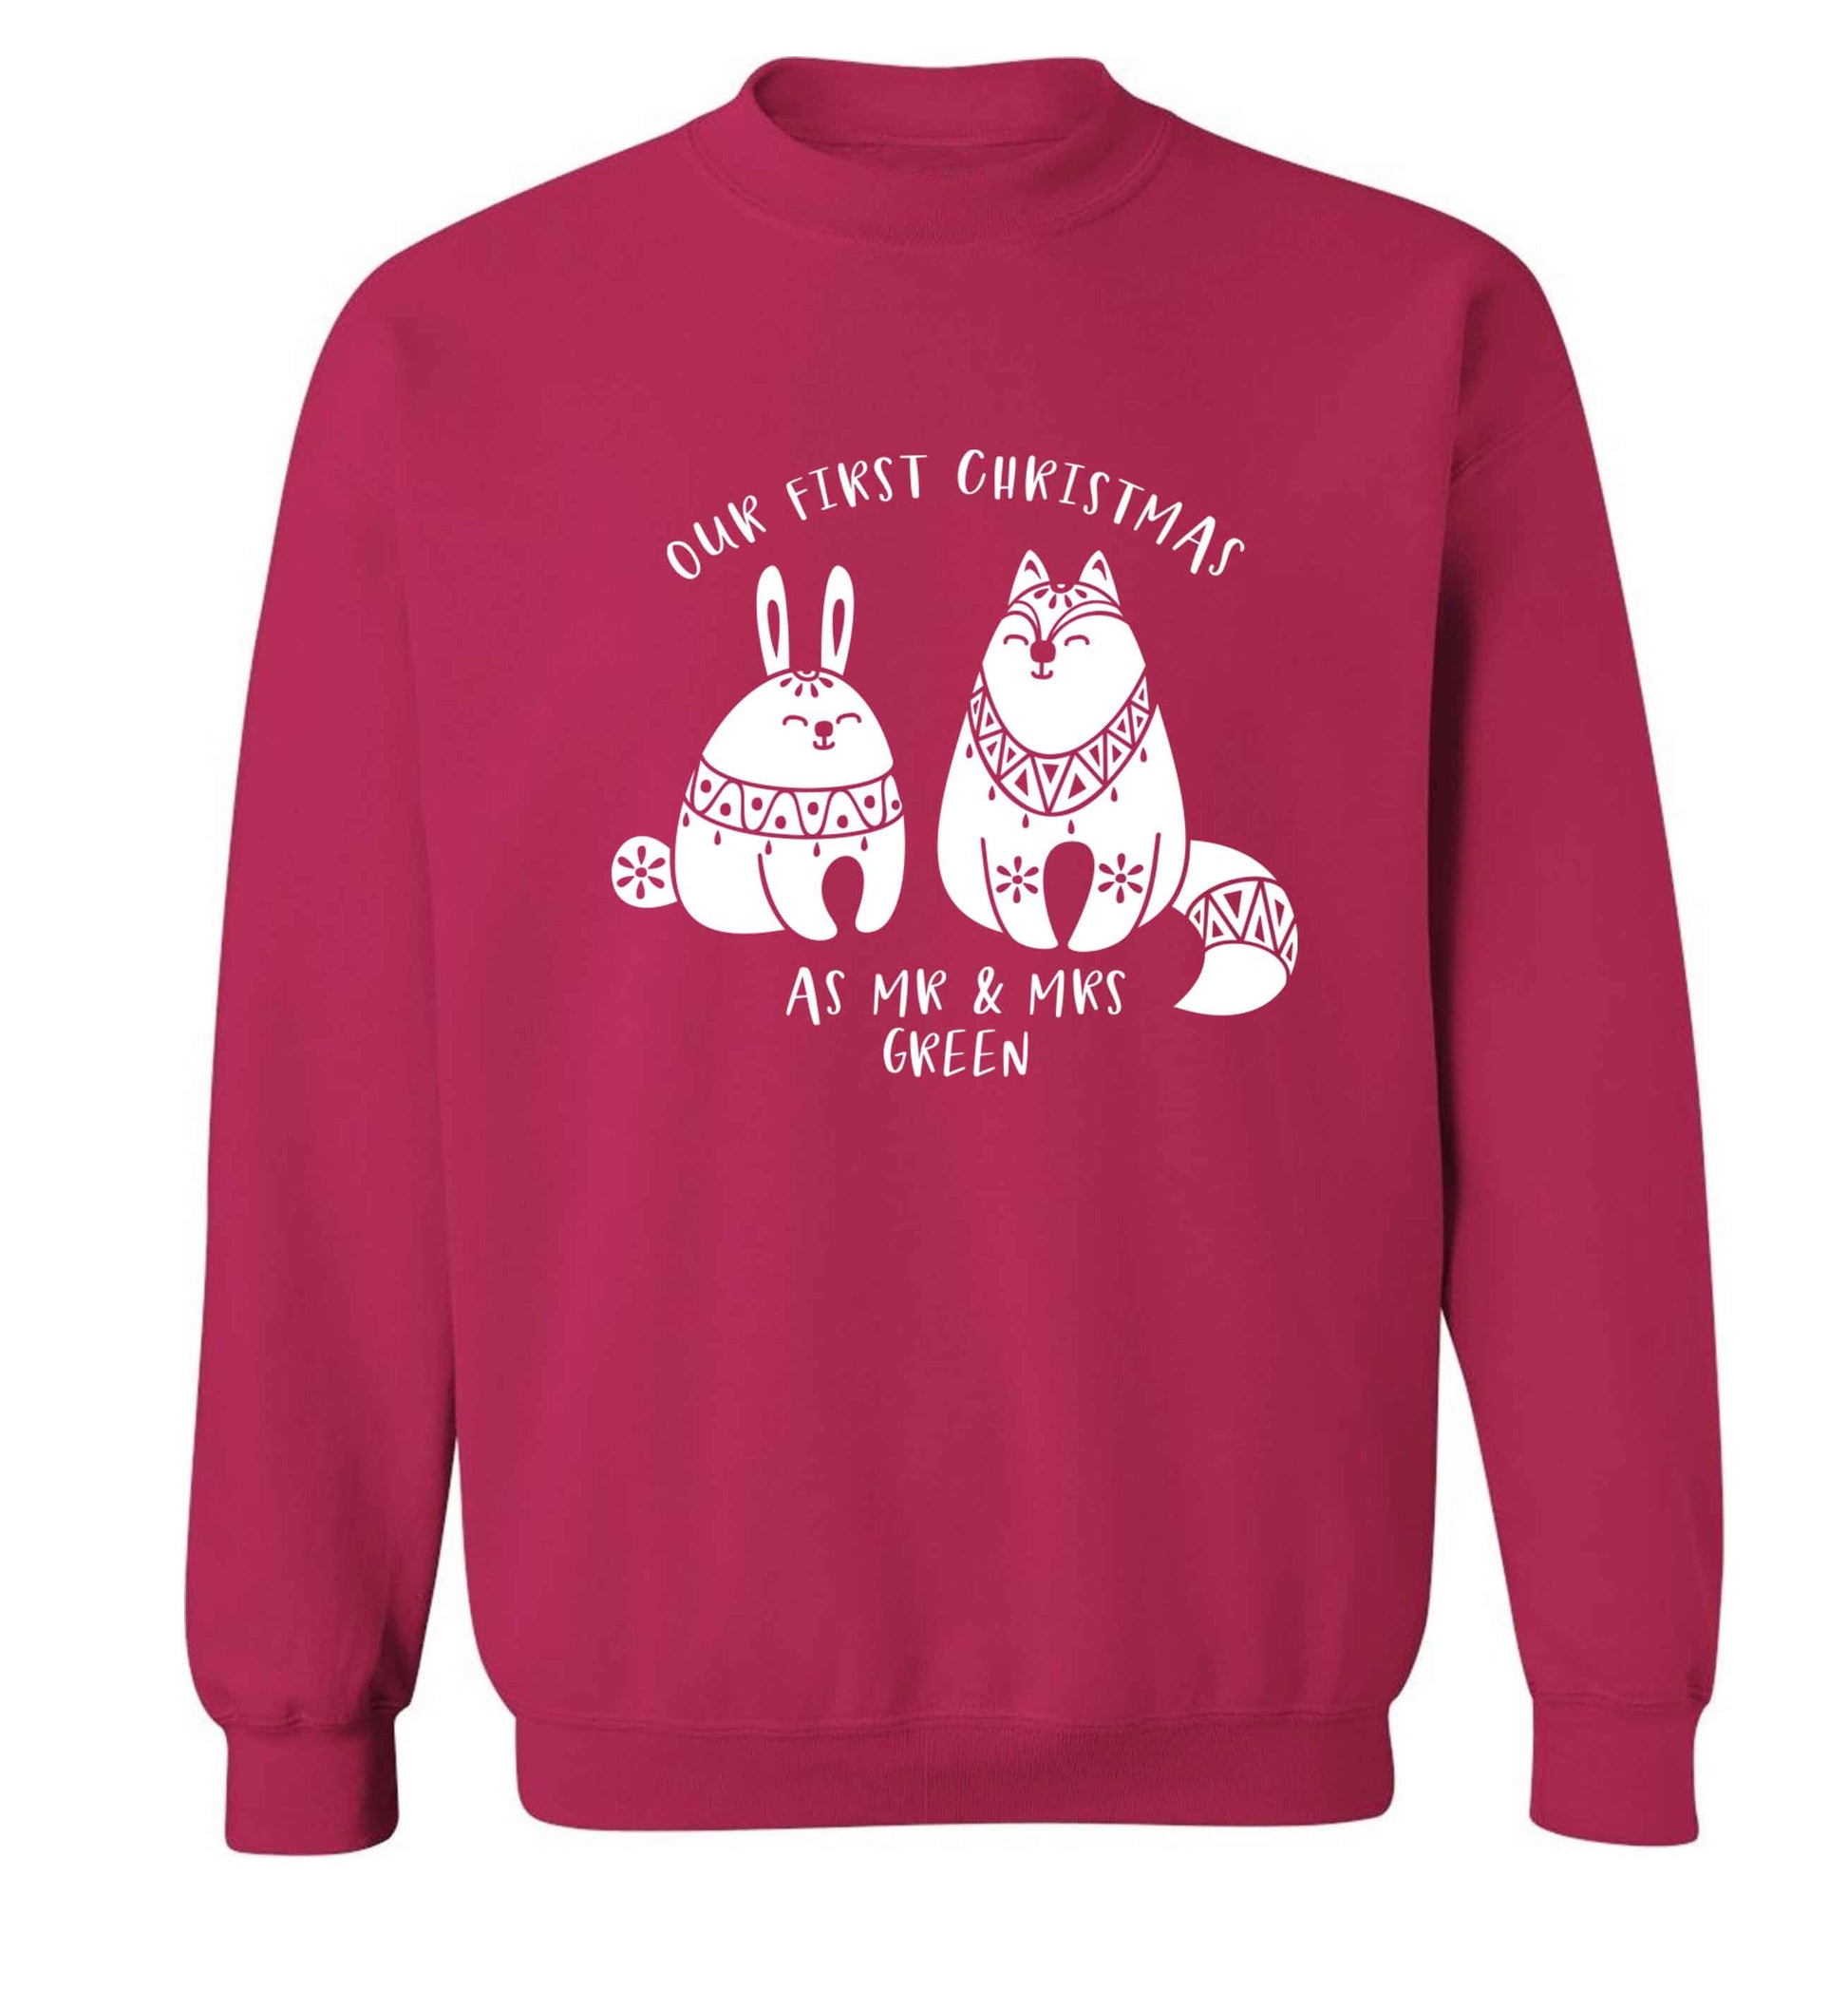 Our first Christmas as Mr & Mrs personalised Adult's unisex pink Sweater 2XL